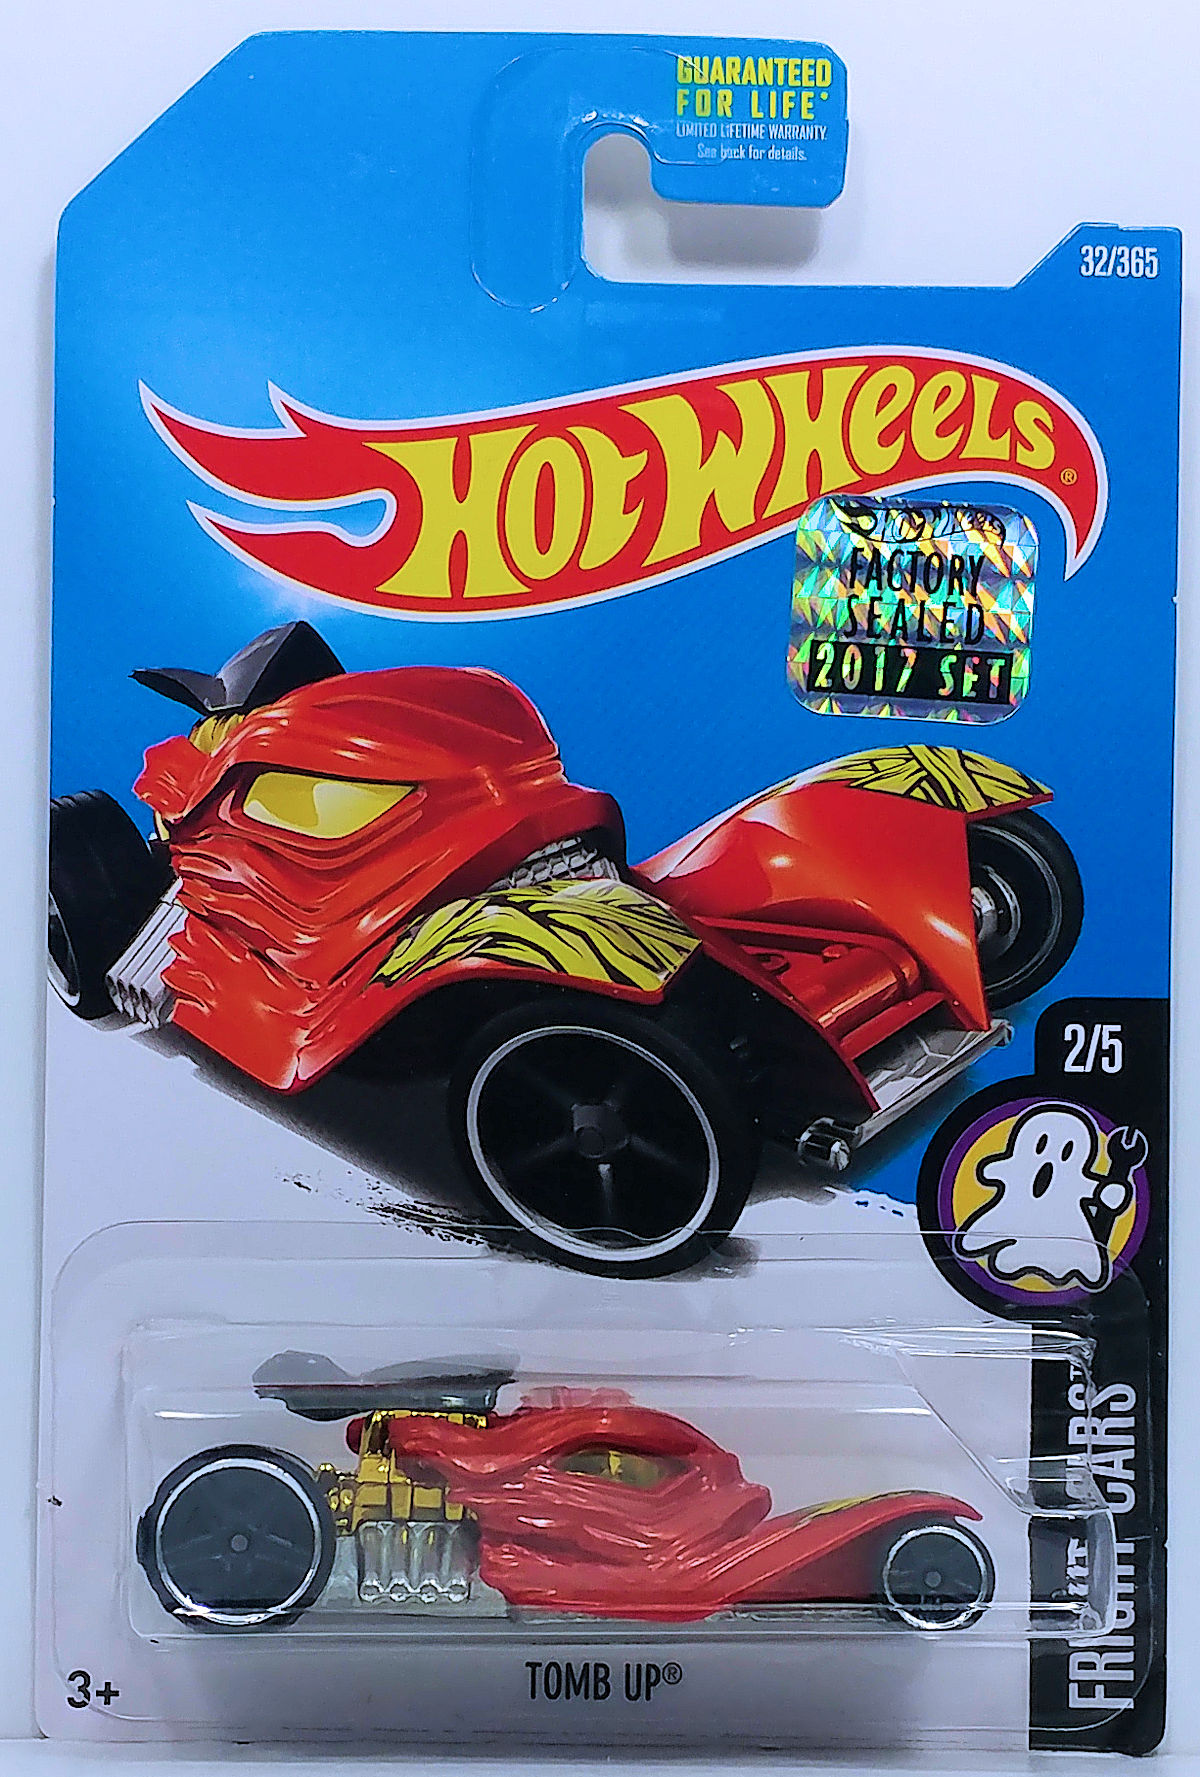 Hot Wheels 2017 #032/365 TOMB UP red Fright cars 